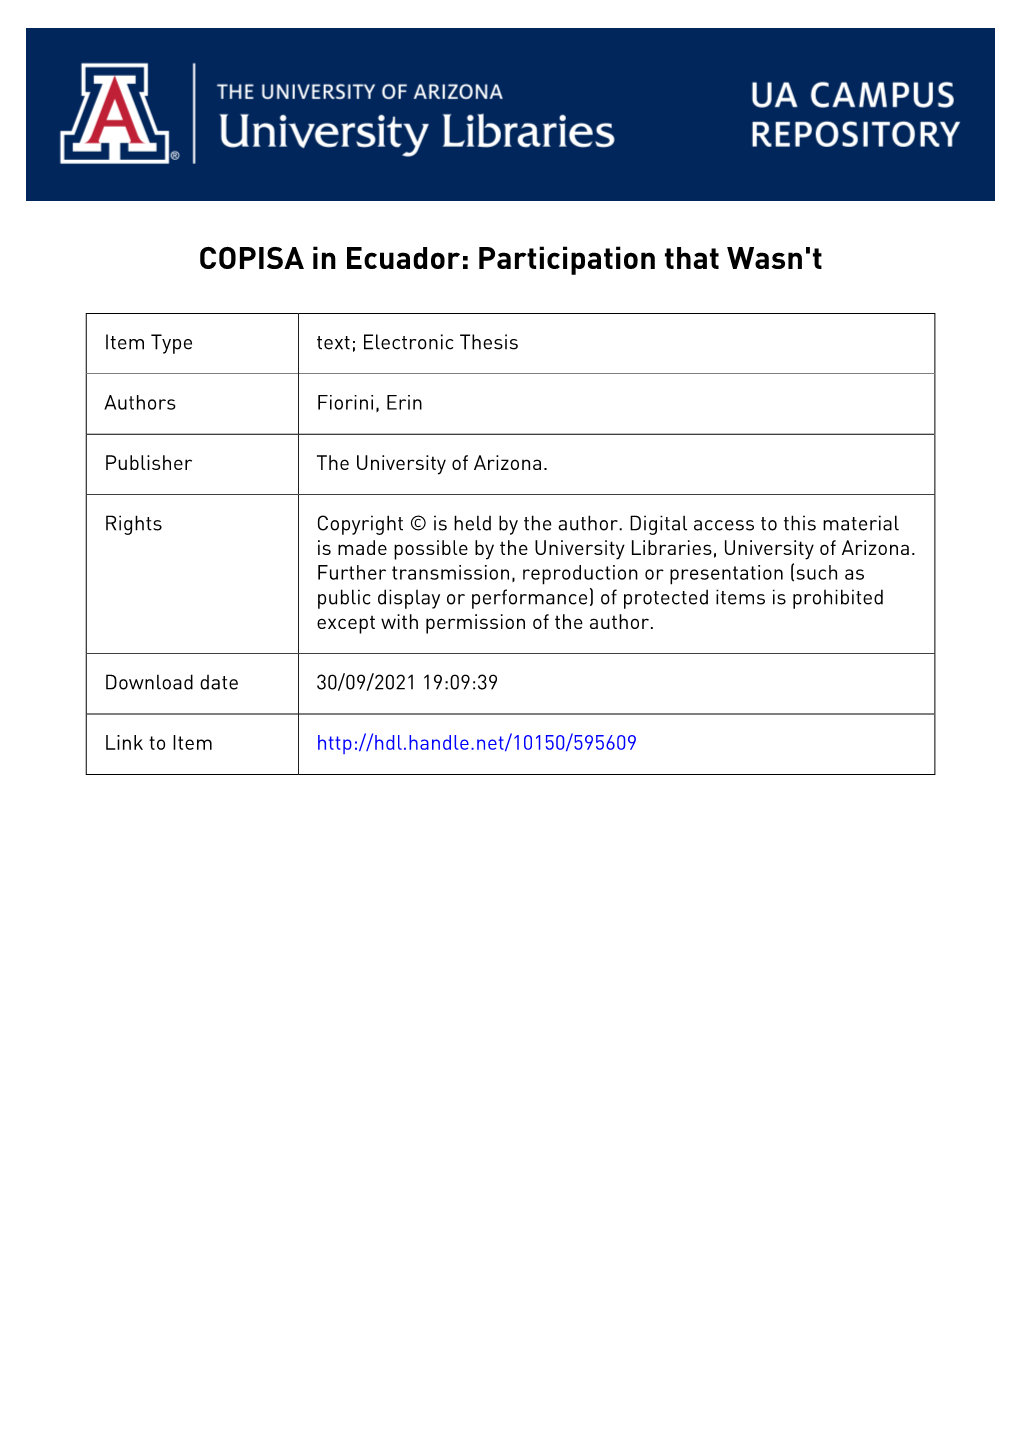 COPISA in ECUADOR: PARTICIPATION THAT WASN't By